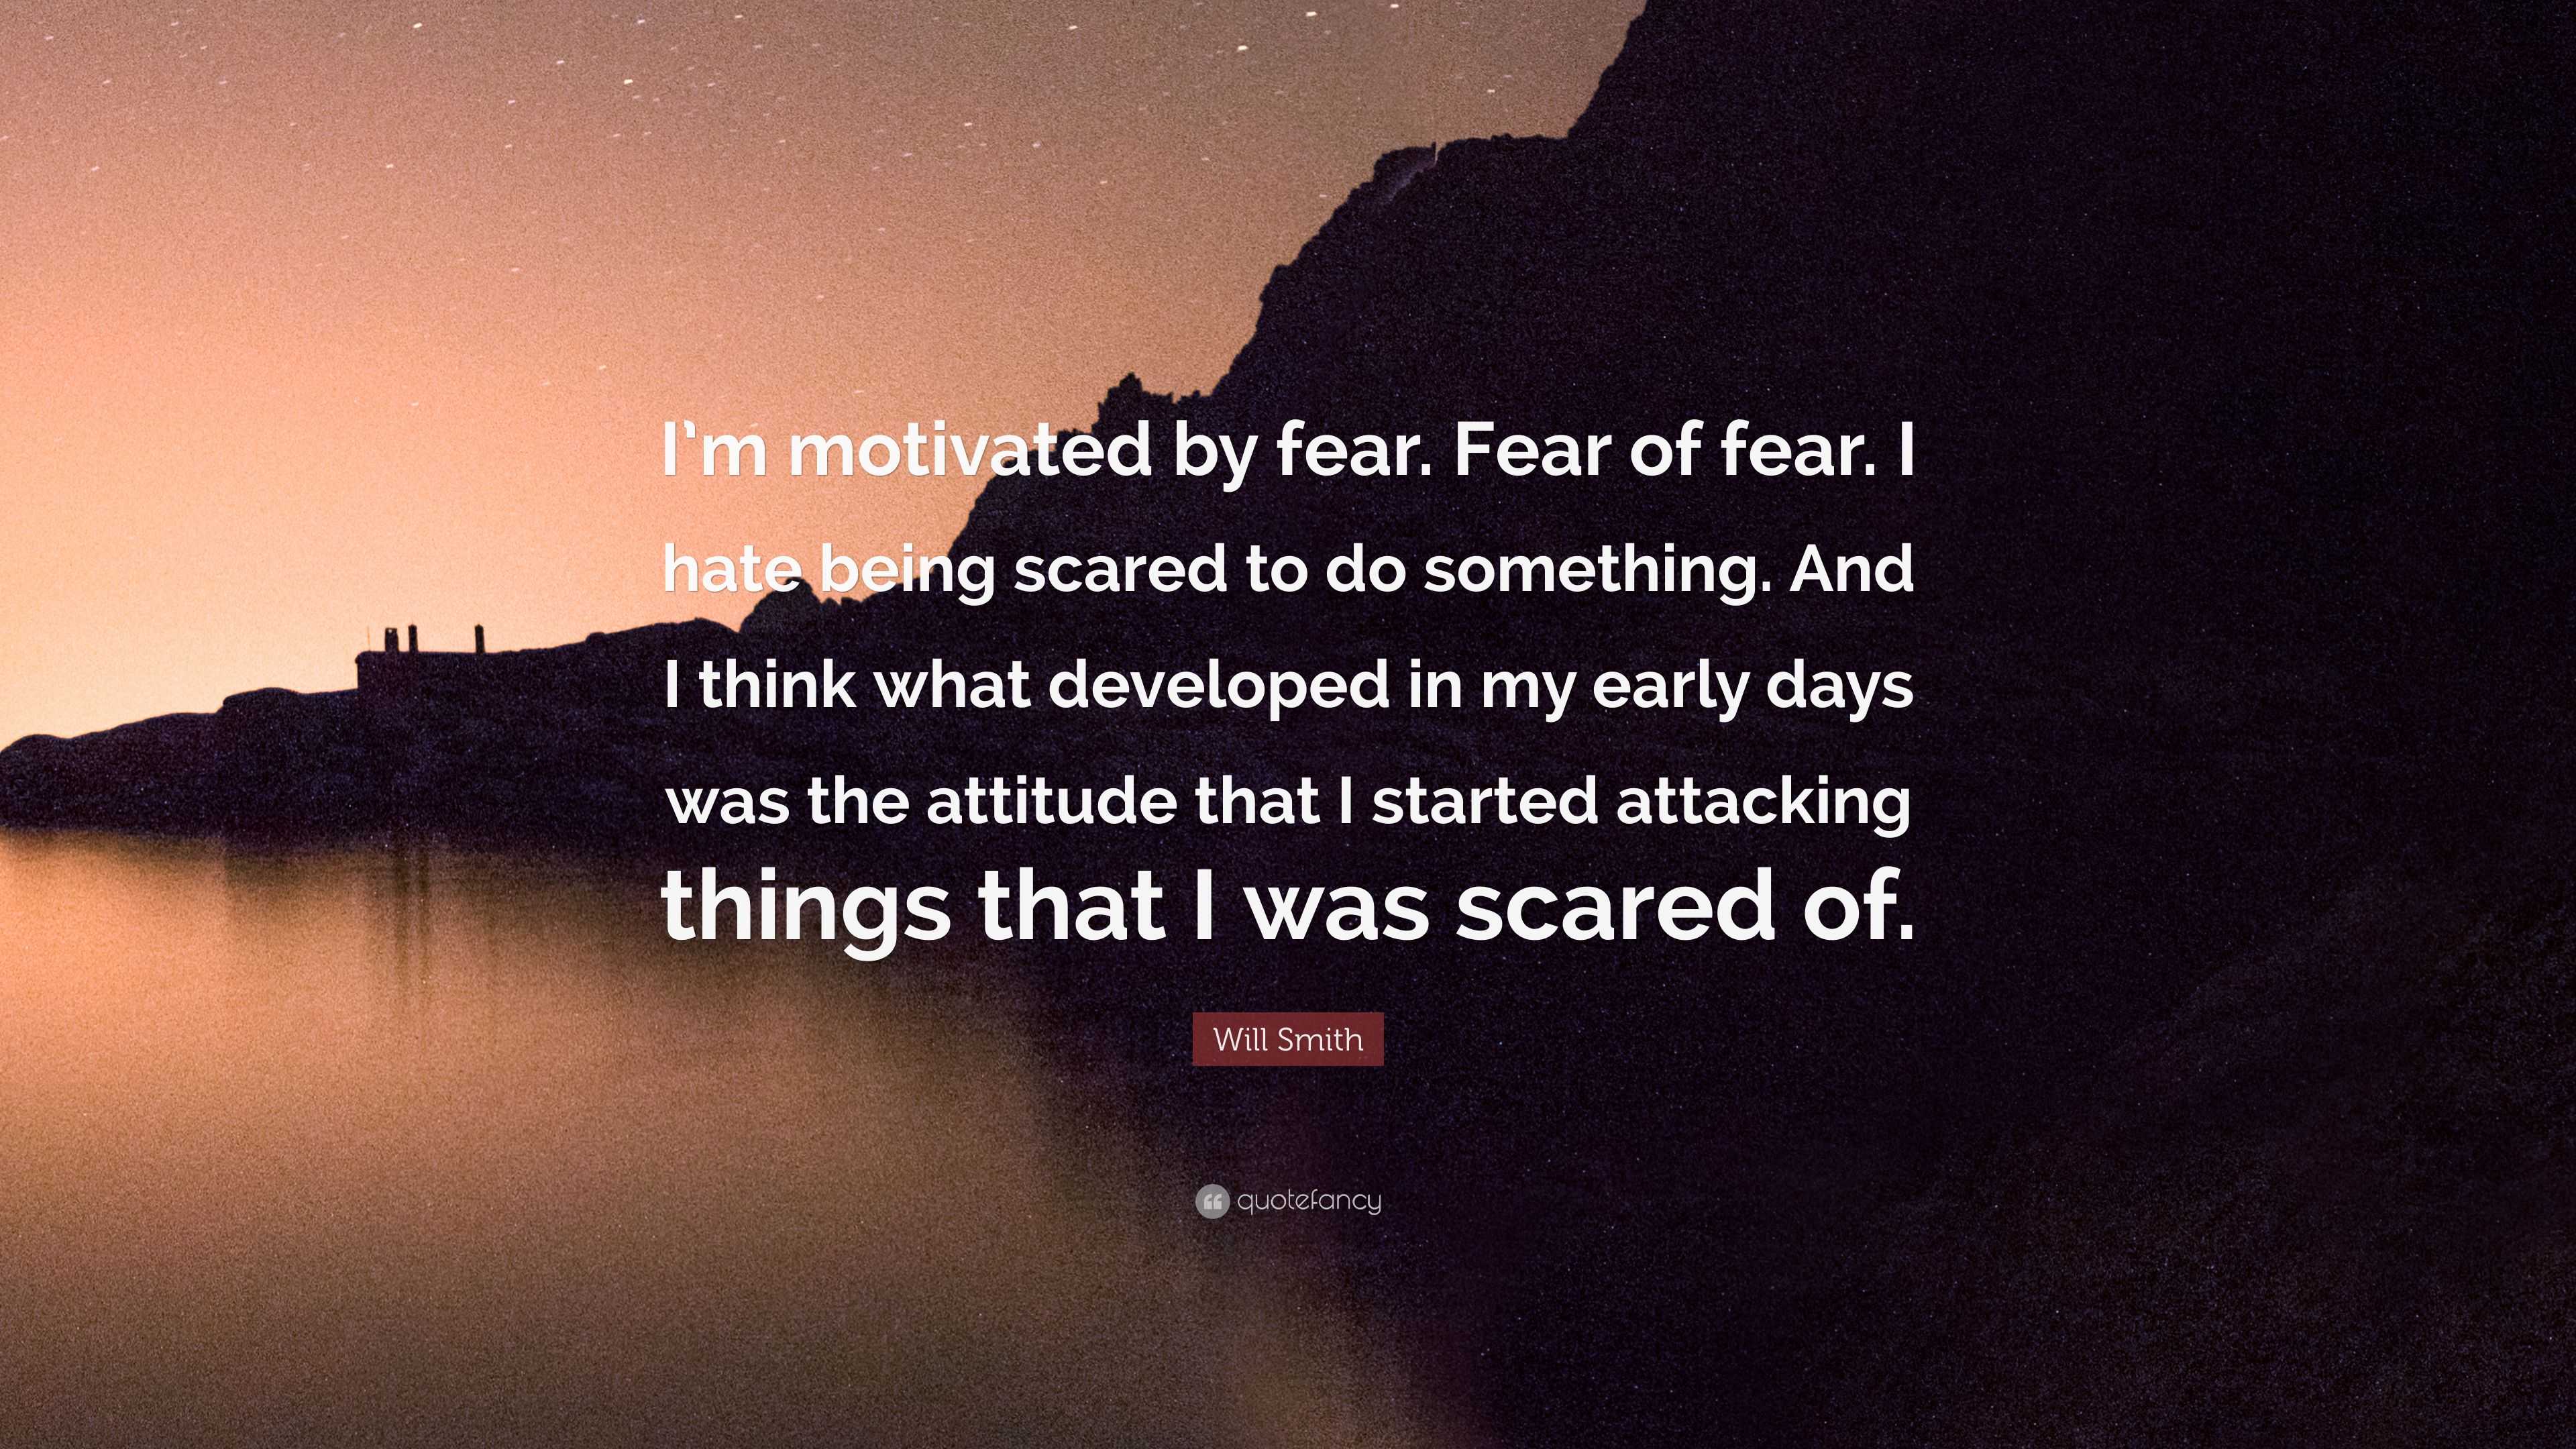 Will Smith Quote “I m motivated by fear Fear of fear